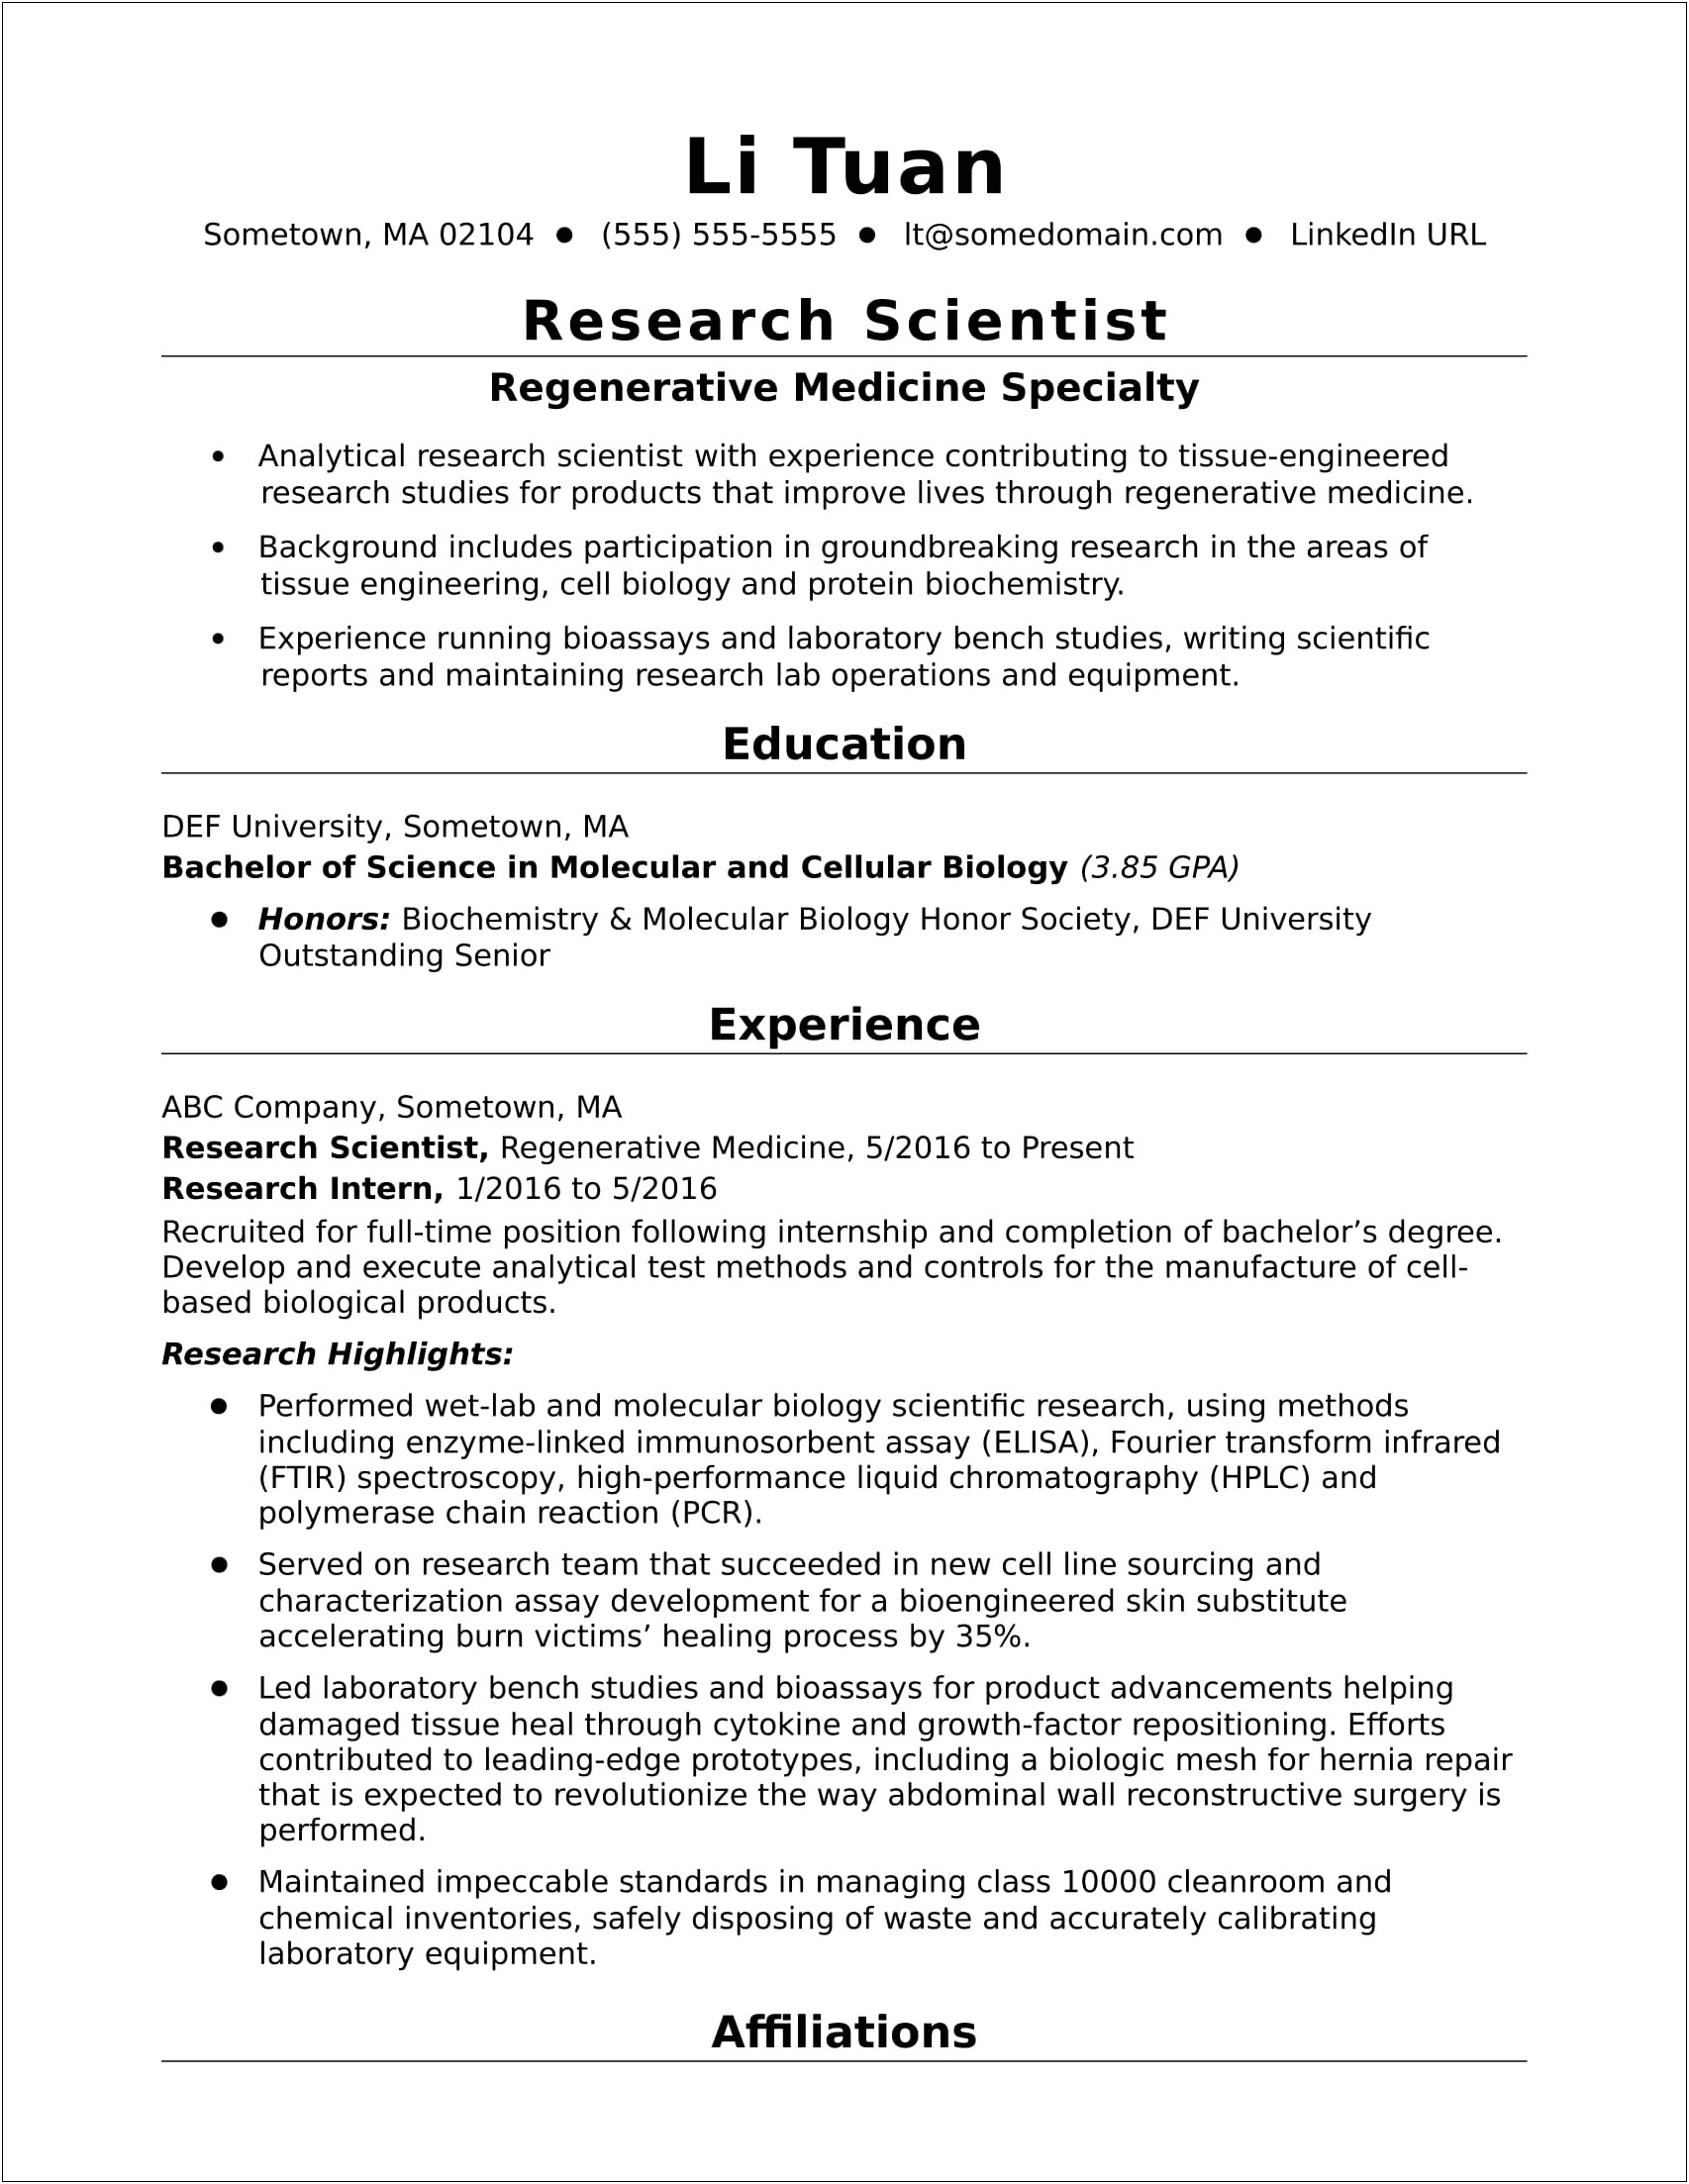 Research As A Skill On Resume